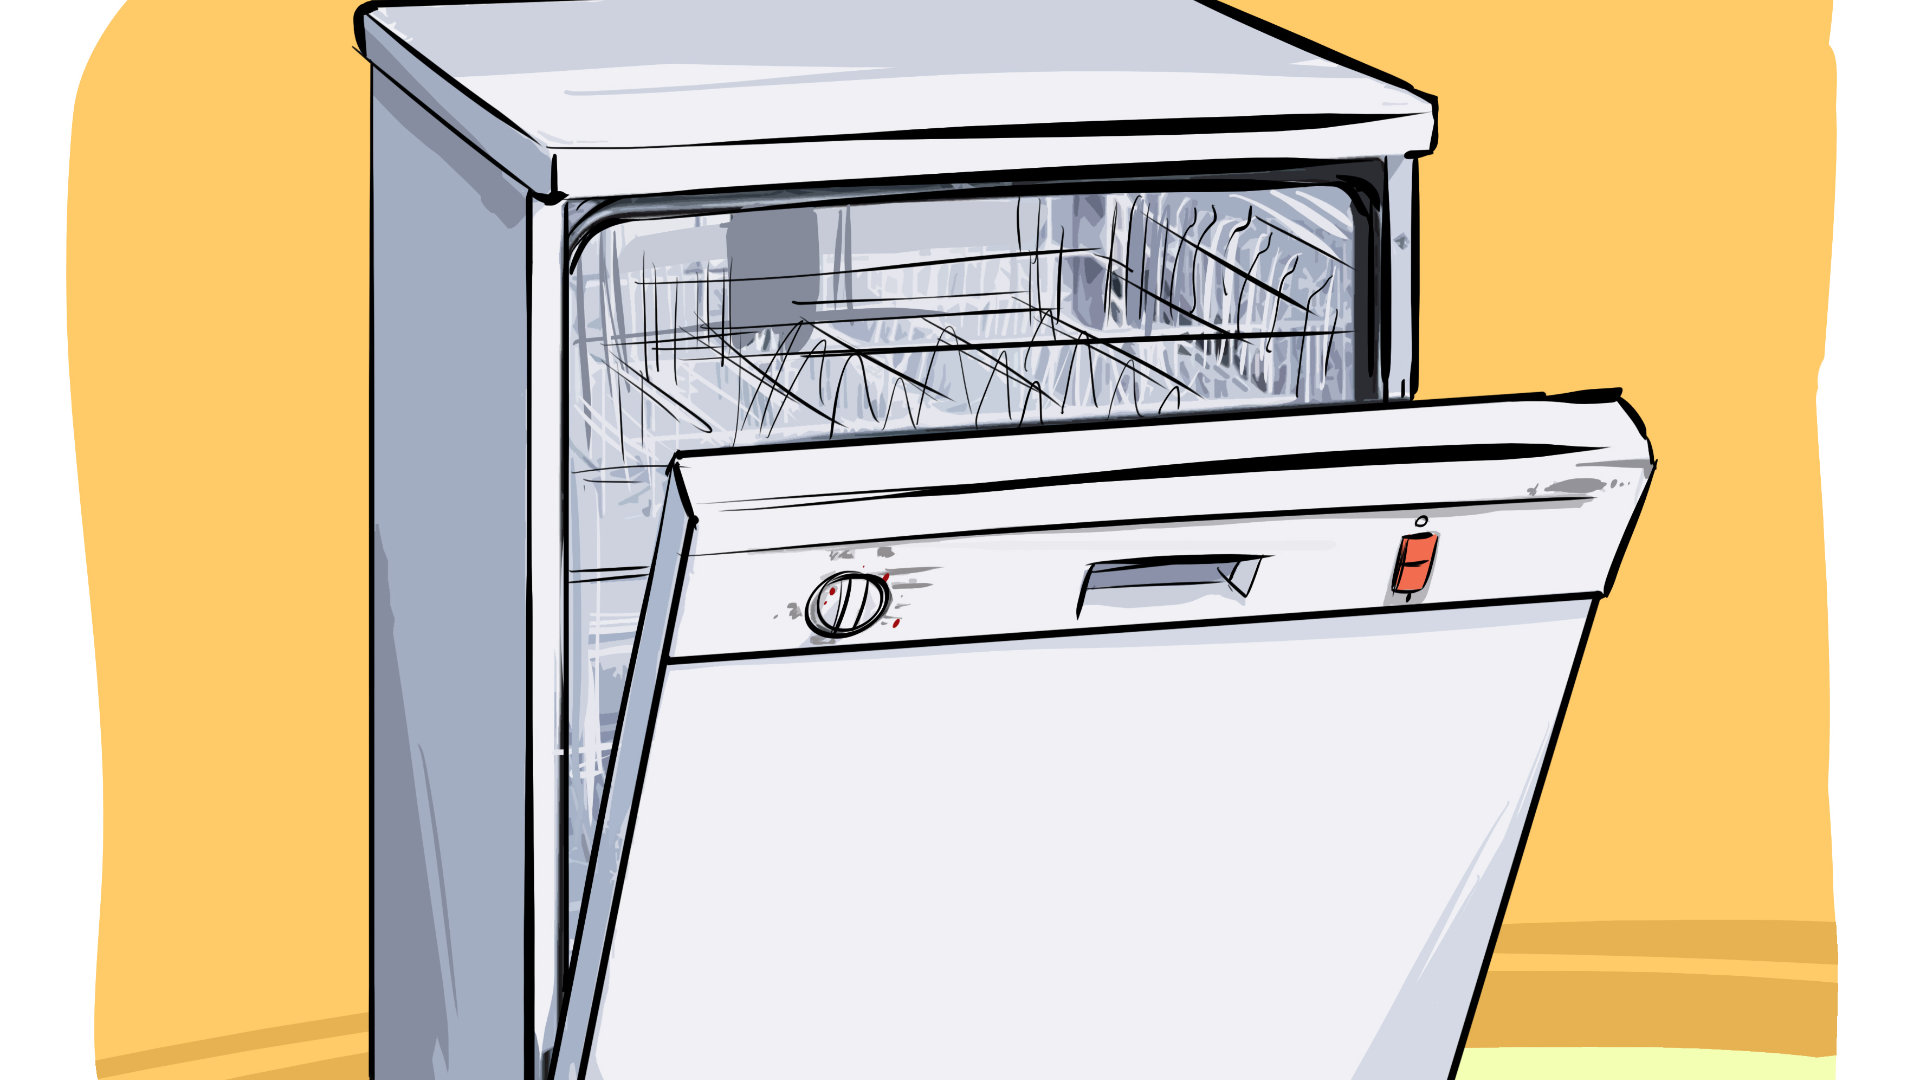 Featured image for “How To Remove a Dishwasher”